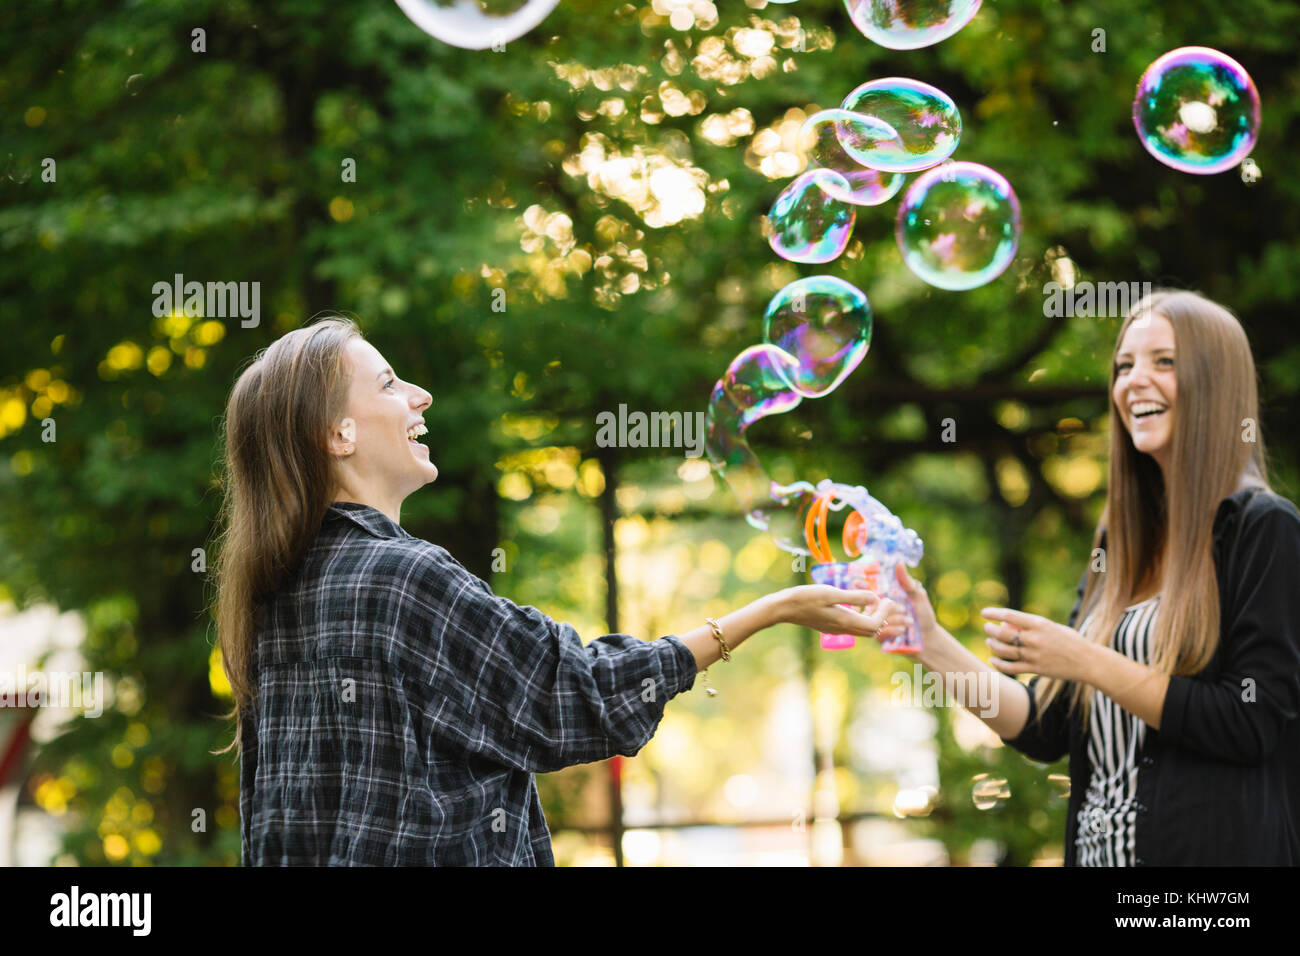 Two young female friends making floating bubbles in park Stock Photo